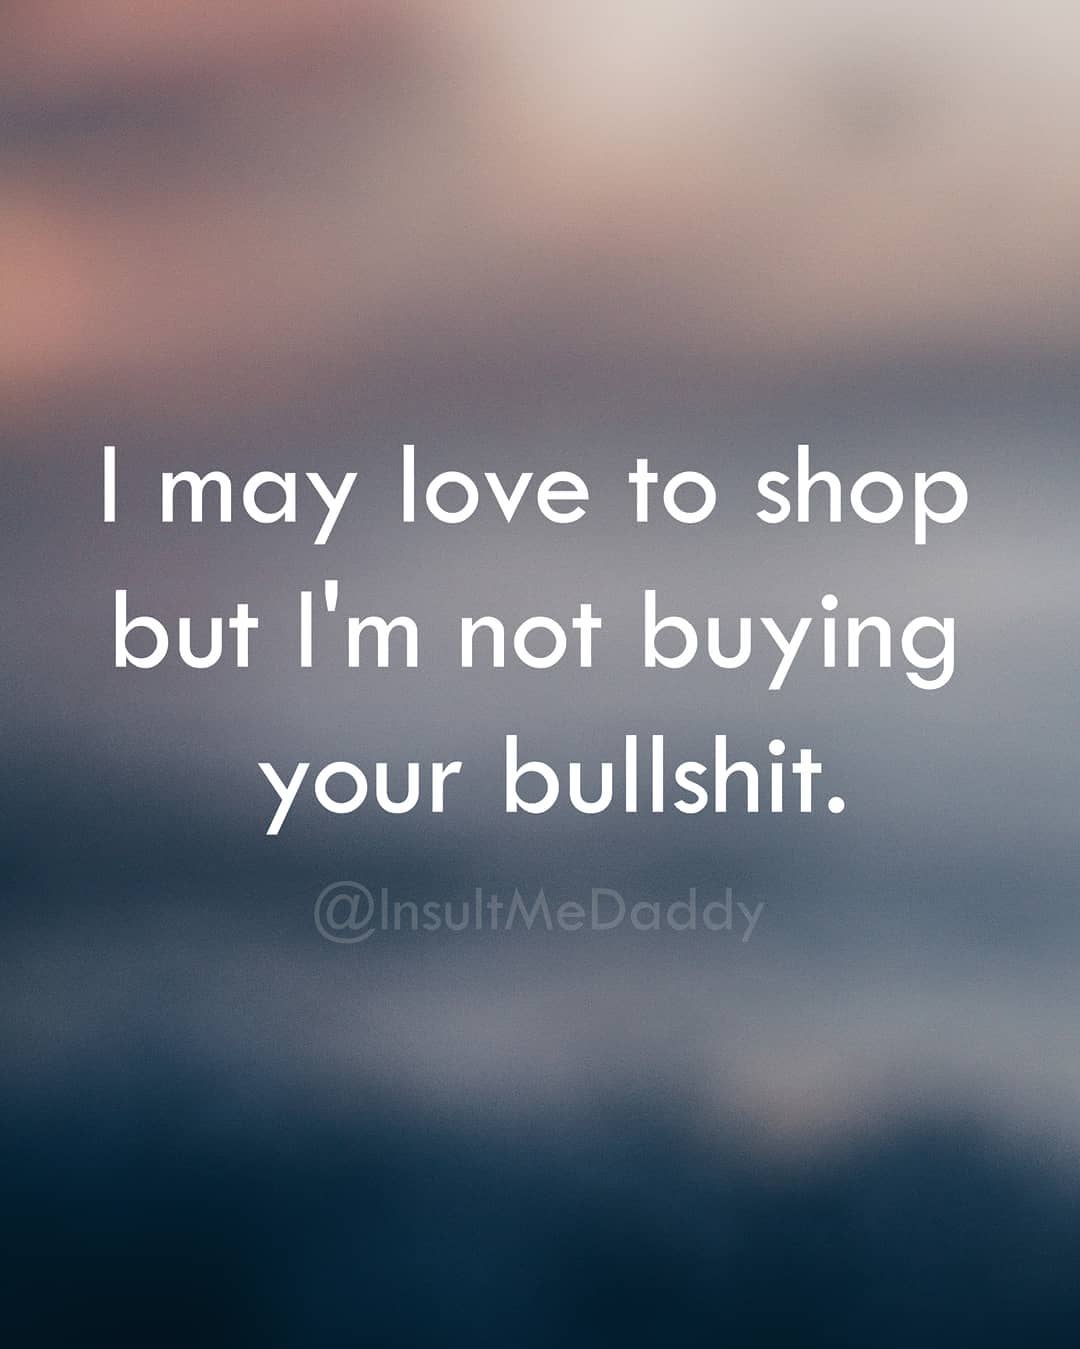 better partner - I may love to shop but I'm not buying your bullshit.